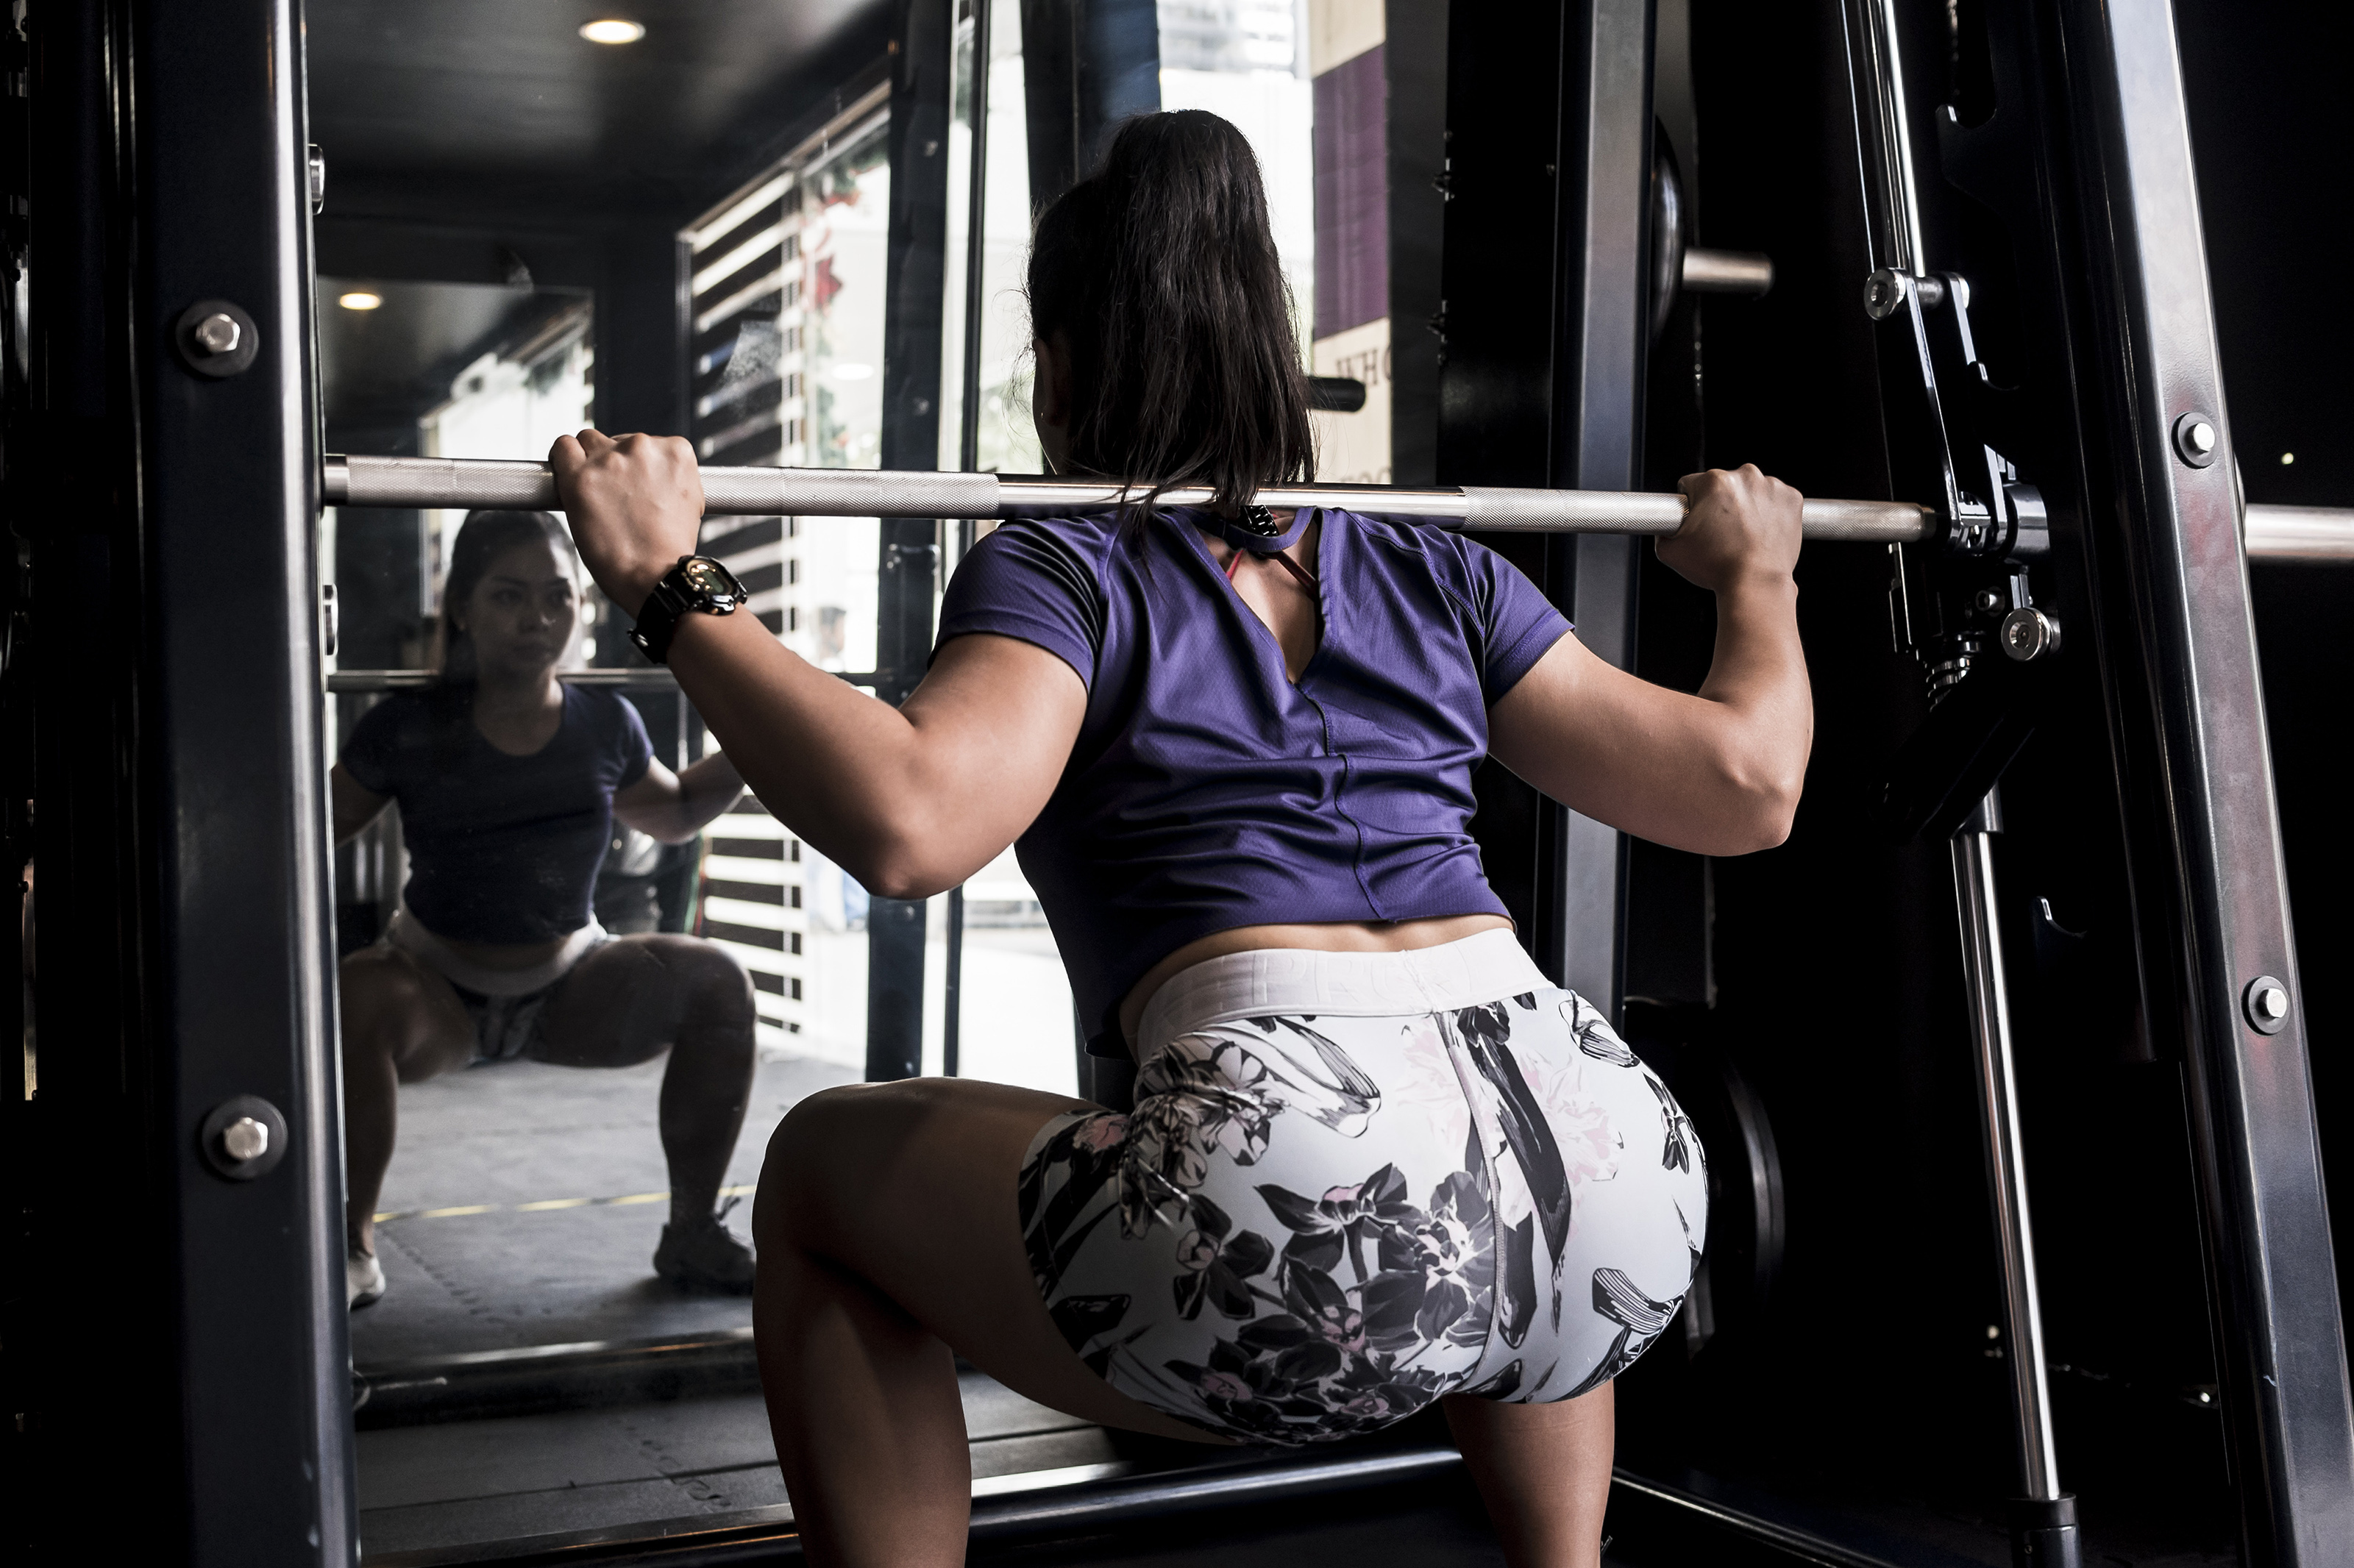 How to master the front rack deep squat